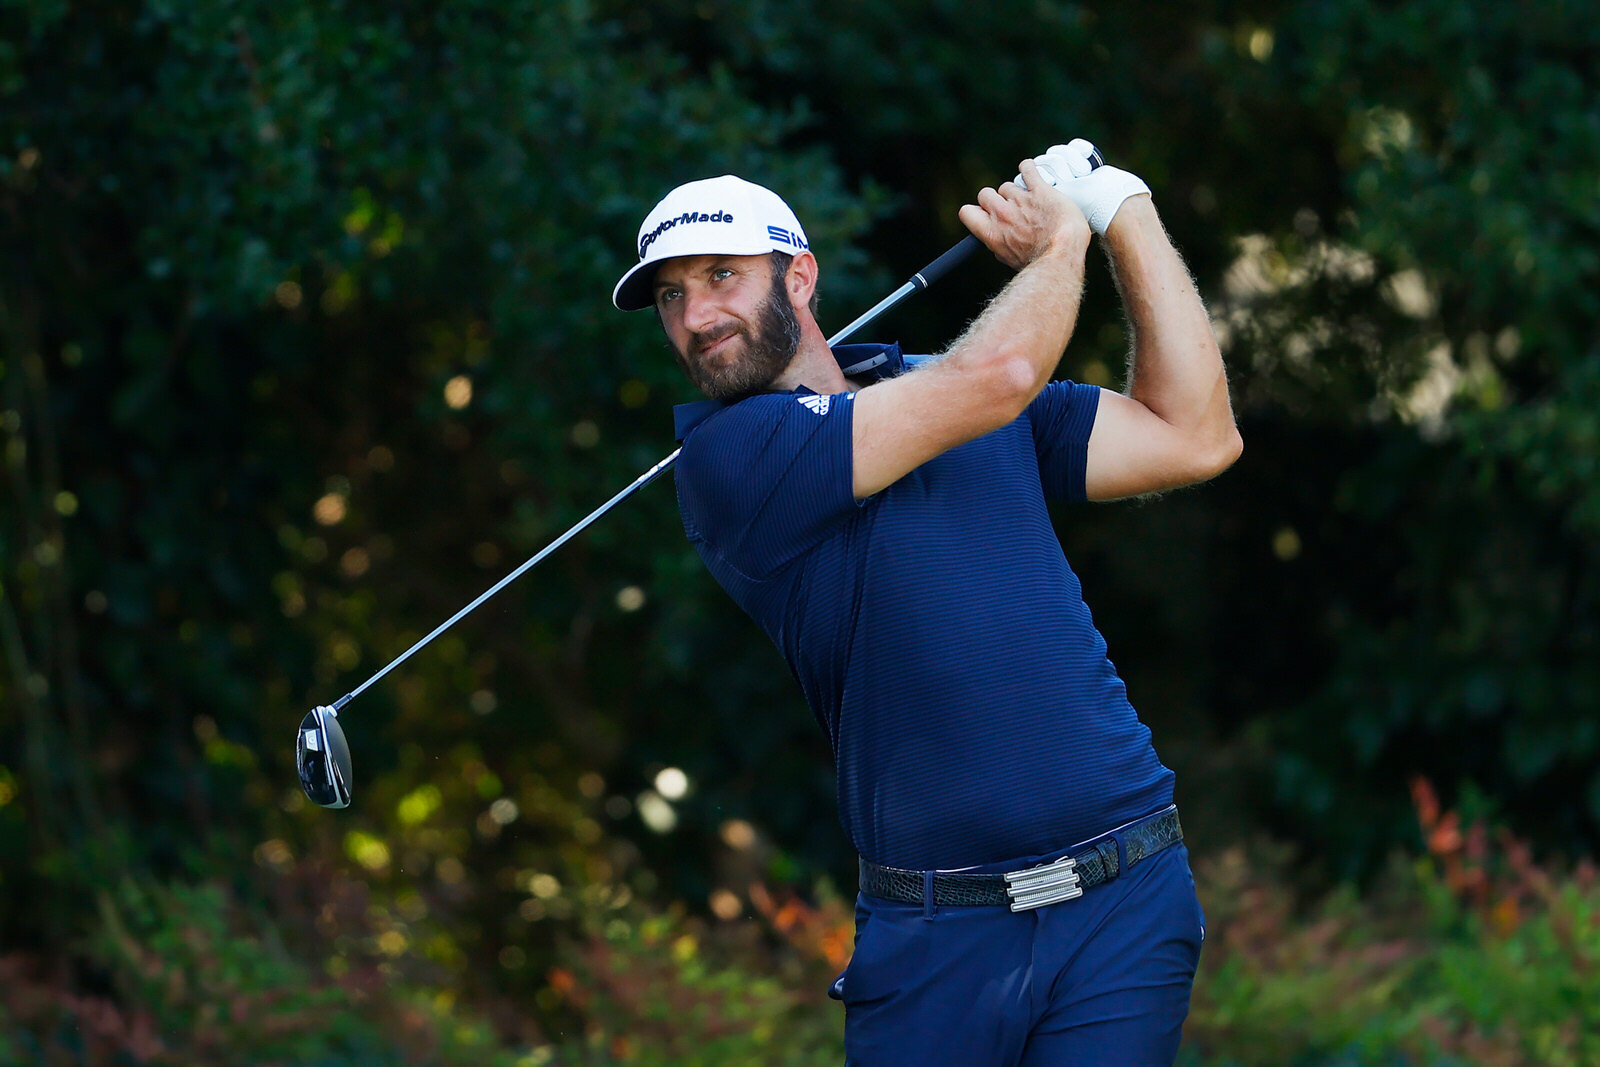  ATLANTA, GEORGIA - SEPTEMBER 07: Dustin Johnson of the United States plays his shot from the 13th tee during the final round of the TOUR Championship at East Lake Golf Club on September 07, 2020 in Atlanta, Georgia. (Photo by Kevin C. Cox/Getty Imag